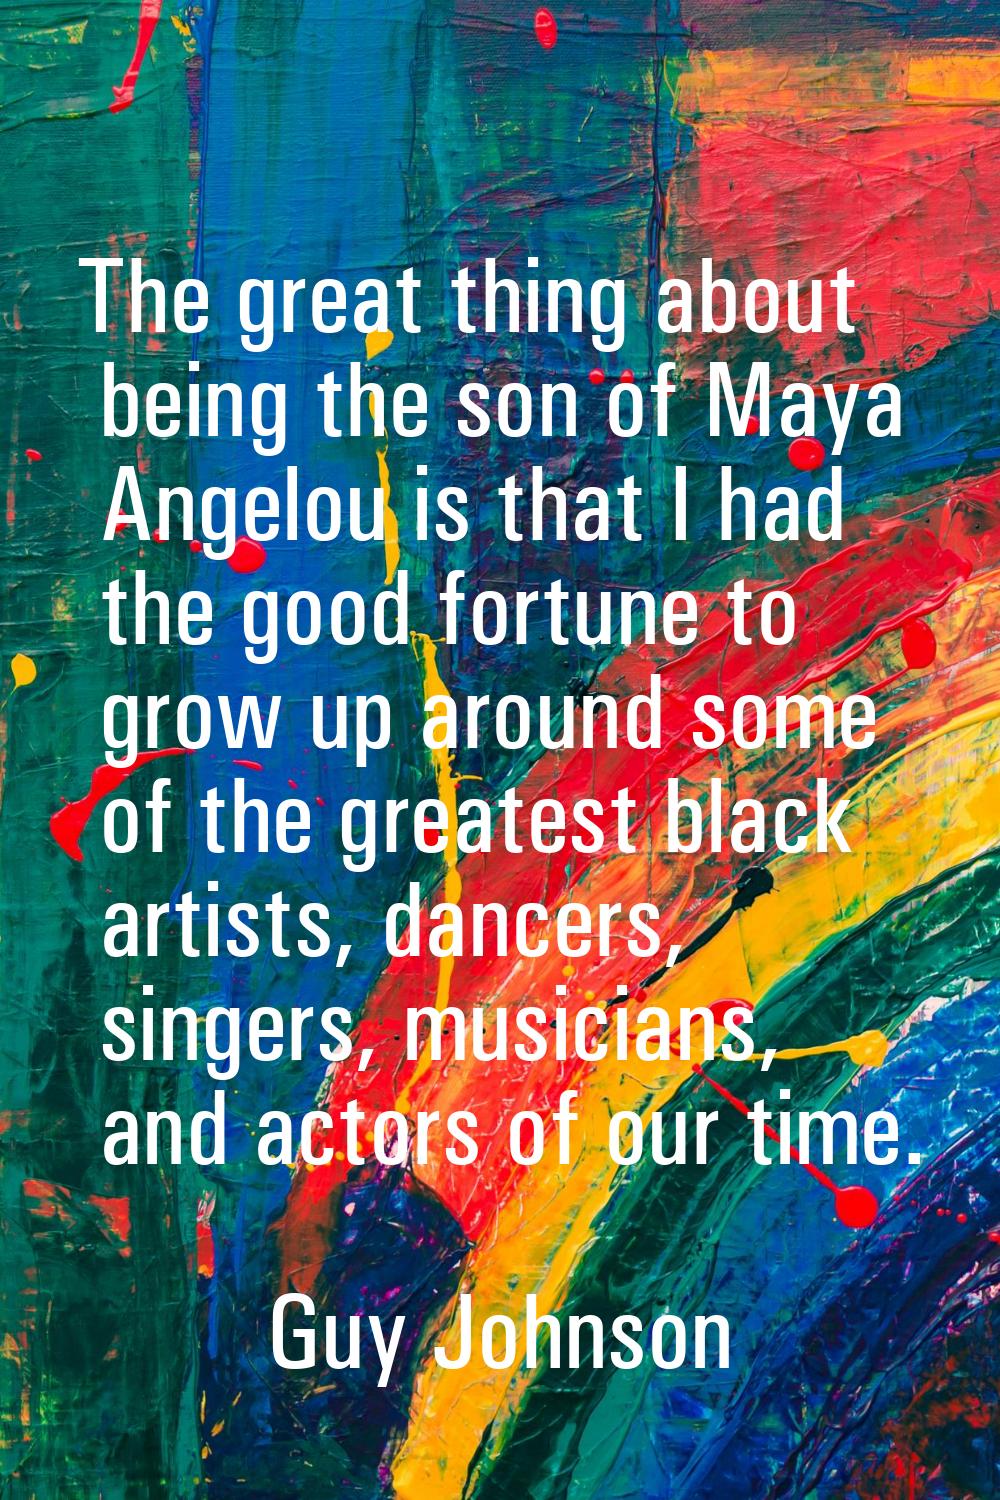 The great thing about being the son of Maya Angelou is that I had the good fortune to grow up aroun